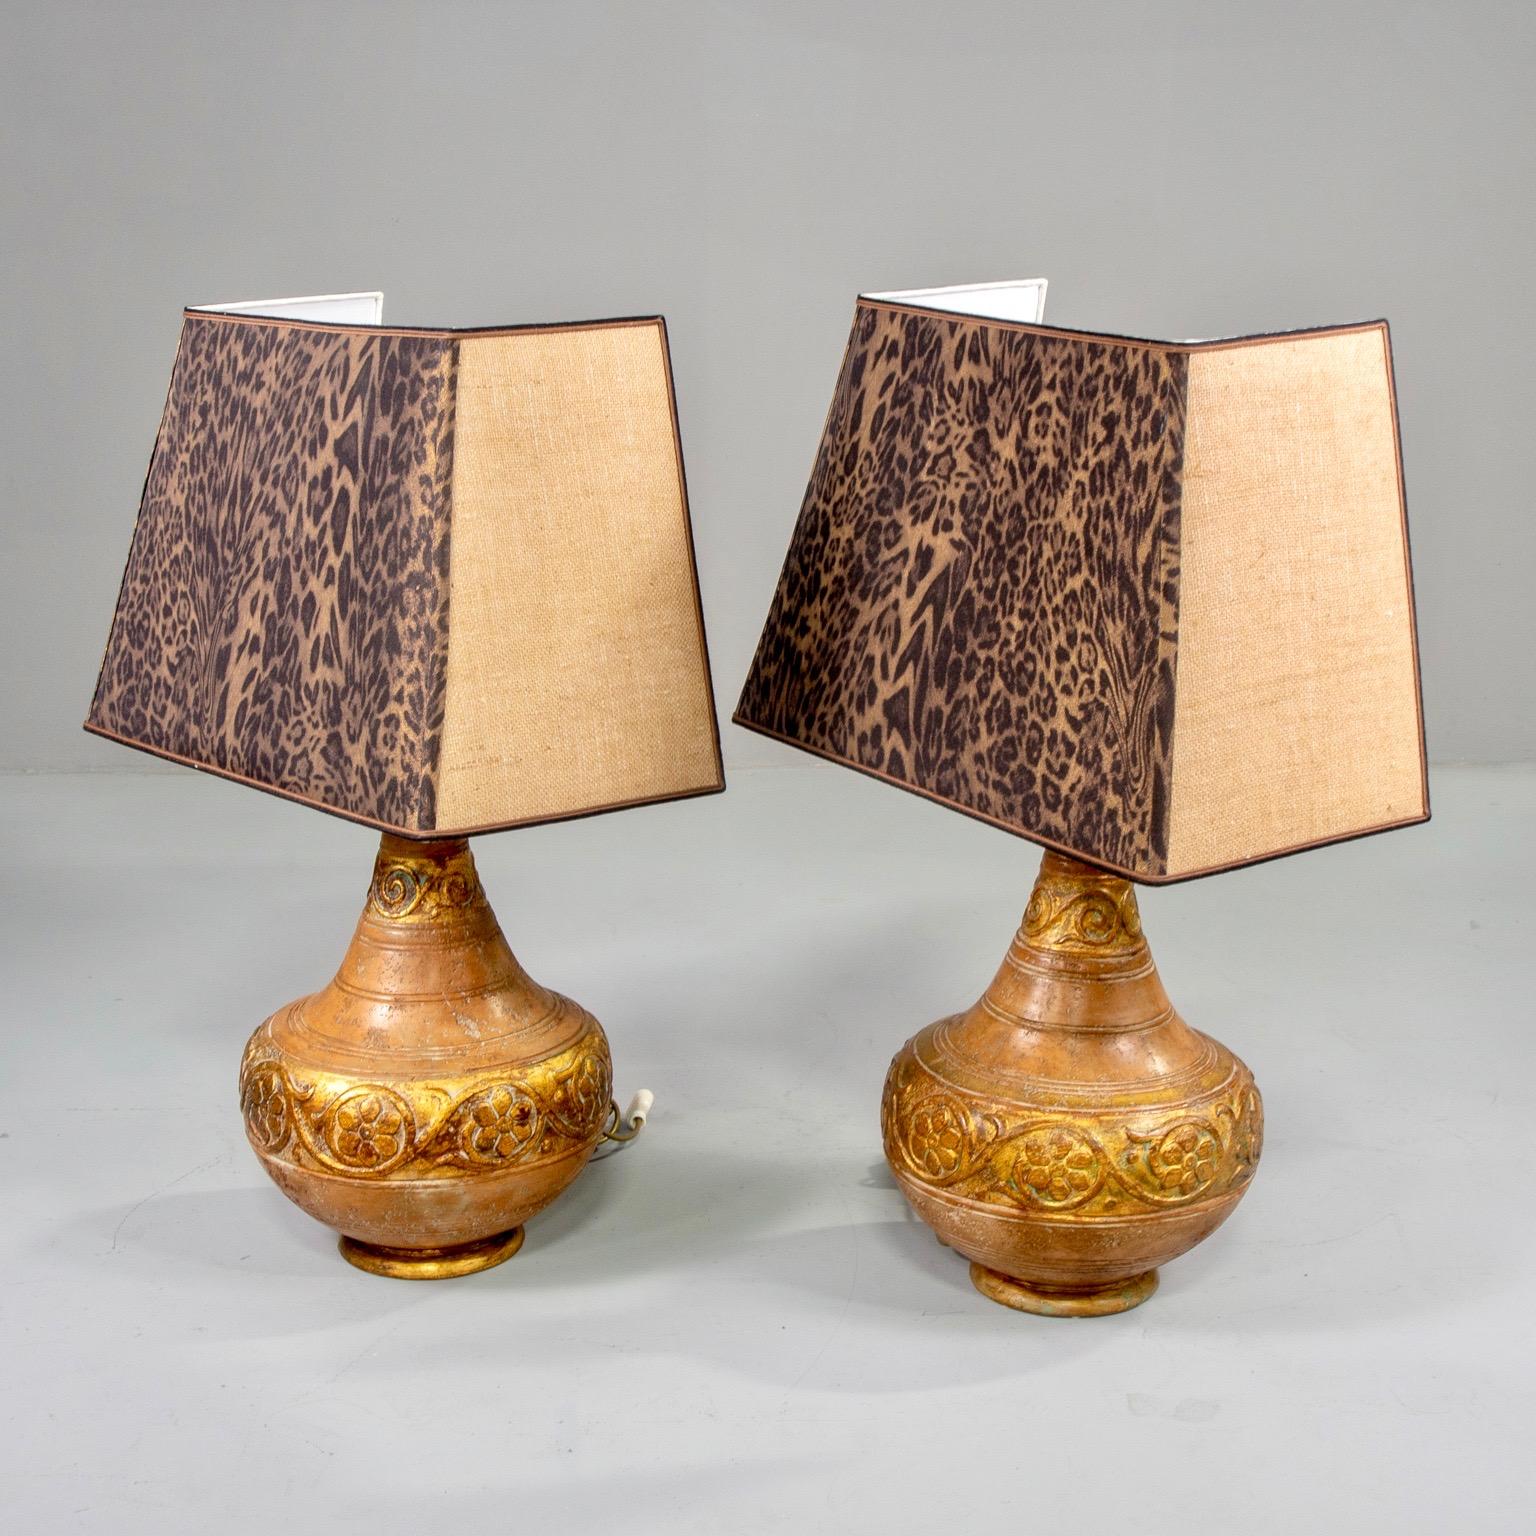 Mid-Century Modern Pair of Italian Midcentury Ceramic Lamps with Leopard Print Shades